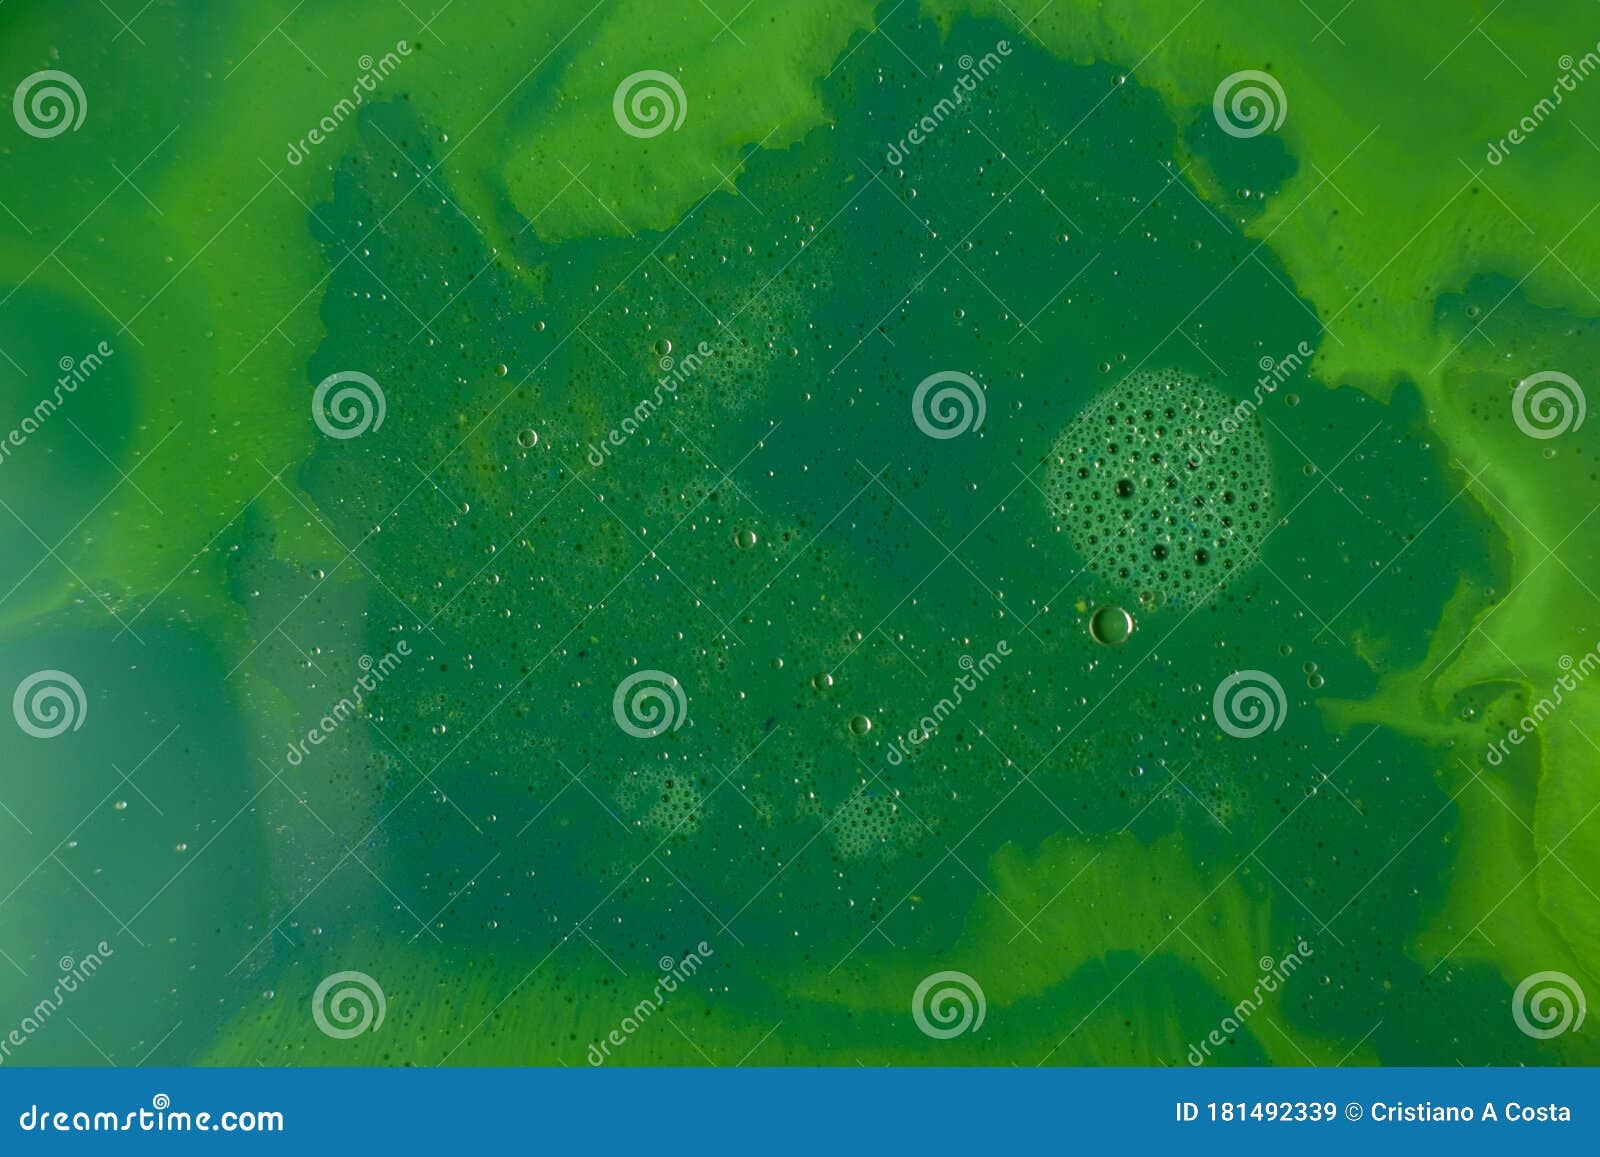 liquid green background with bubbles